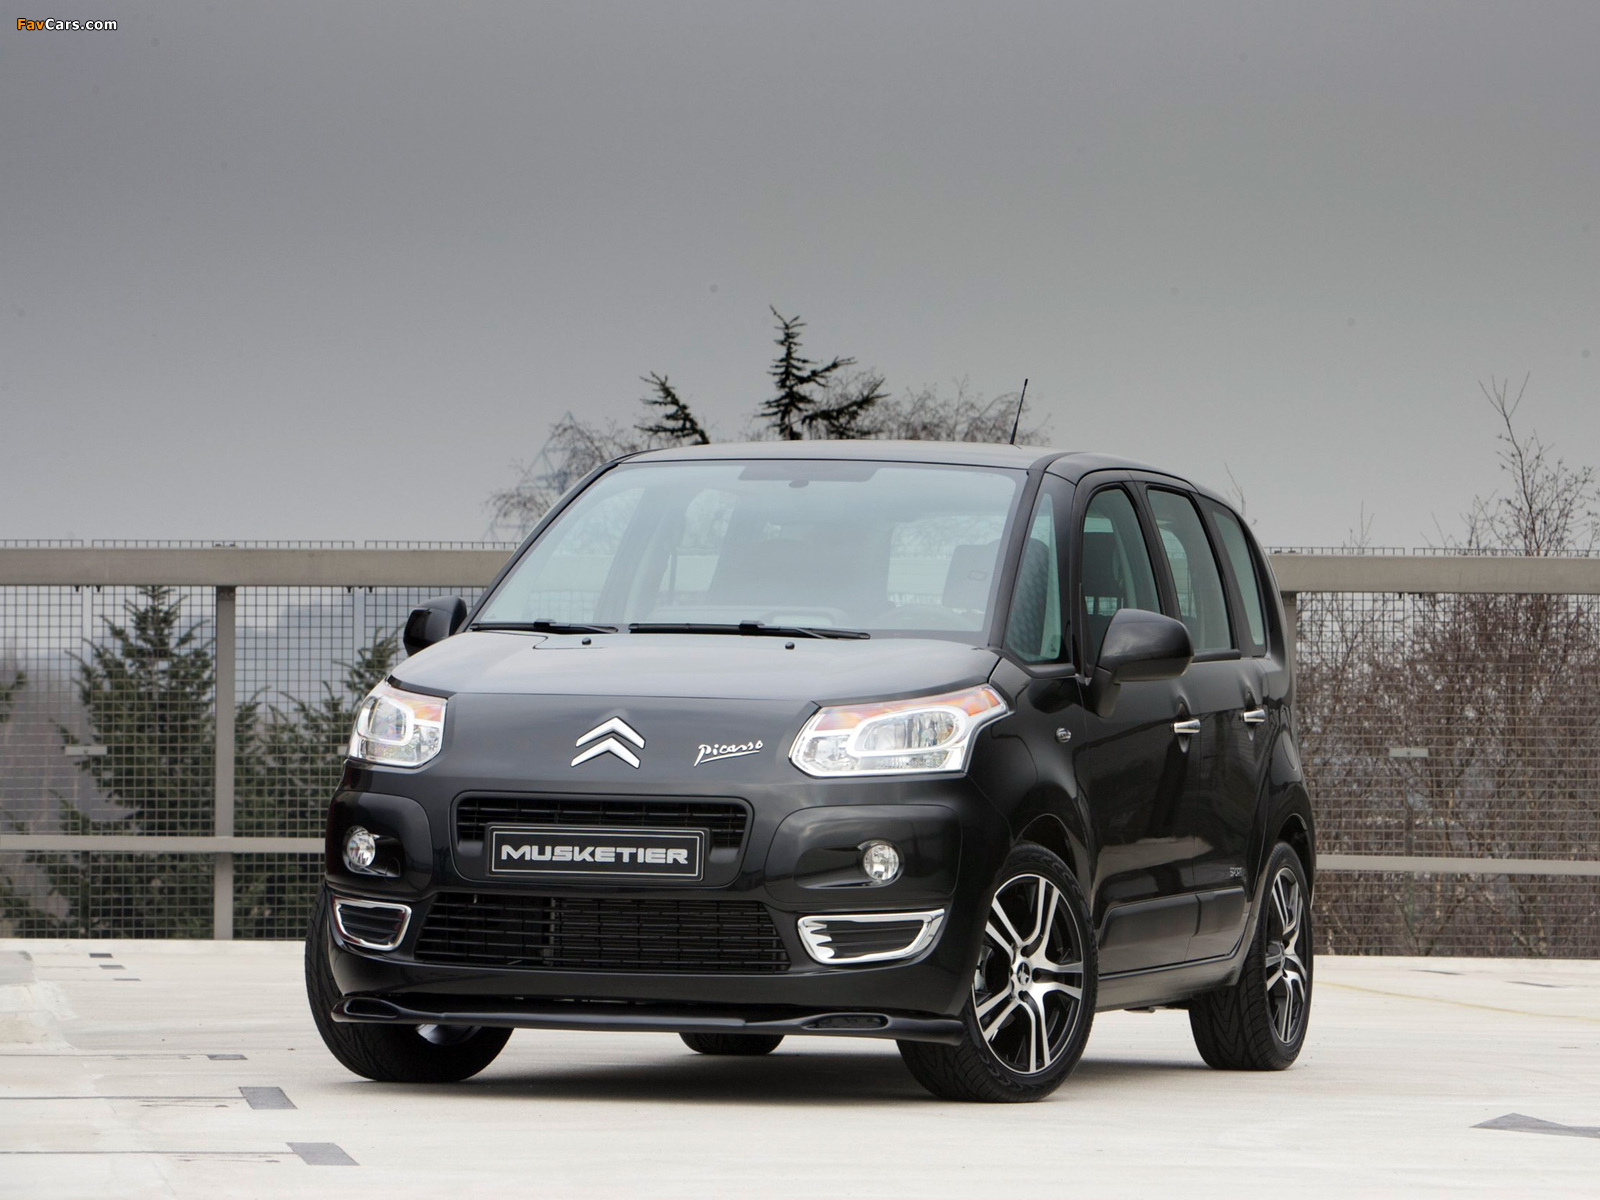 Images of Musketier Citroën C3 Picasso 2009 (1600 x 1200)